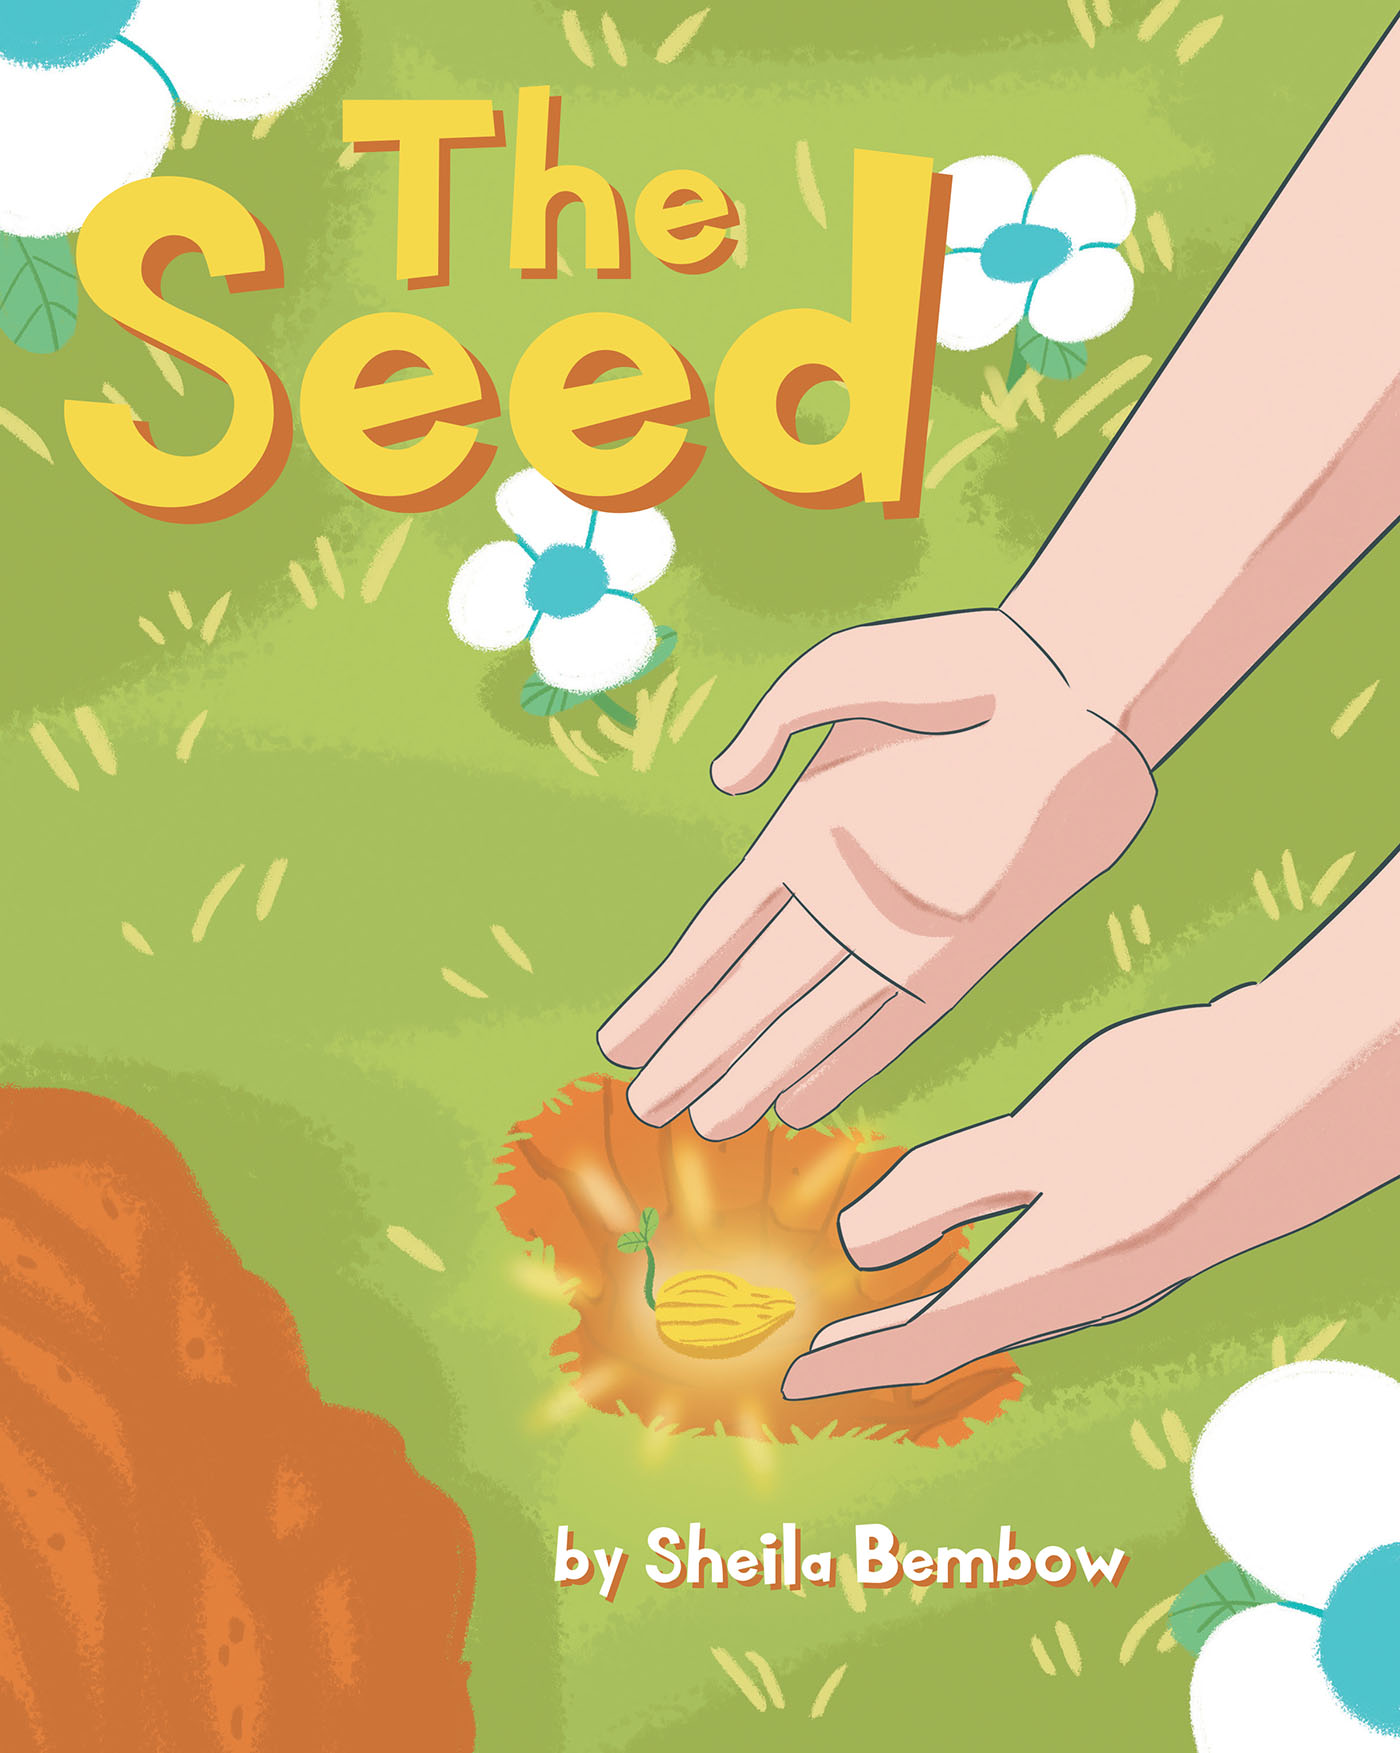 The Seed Cover Image